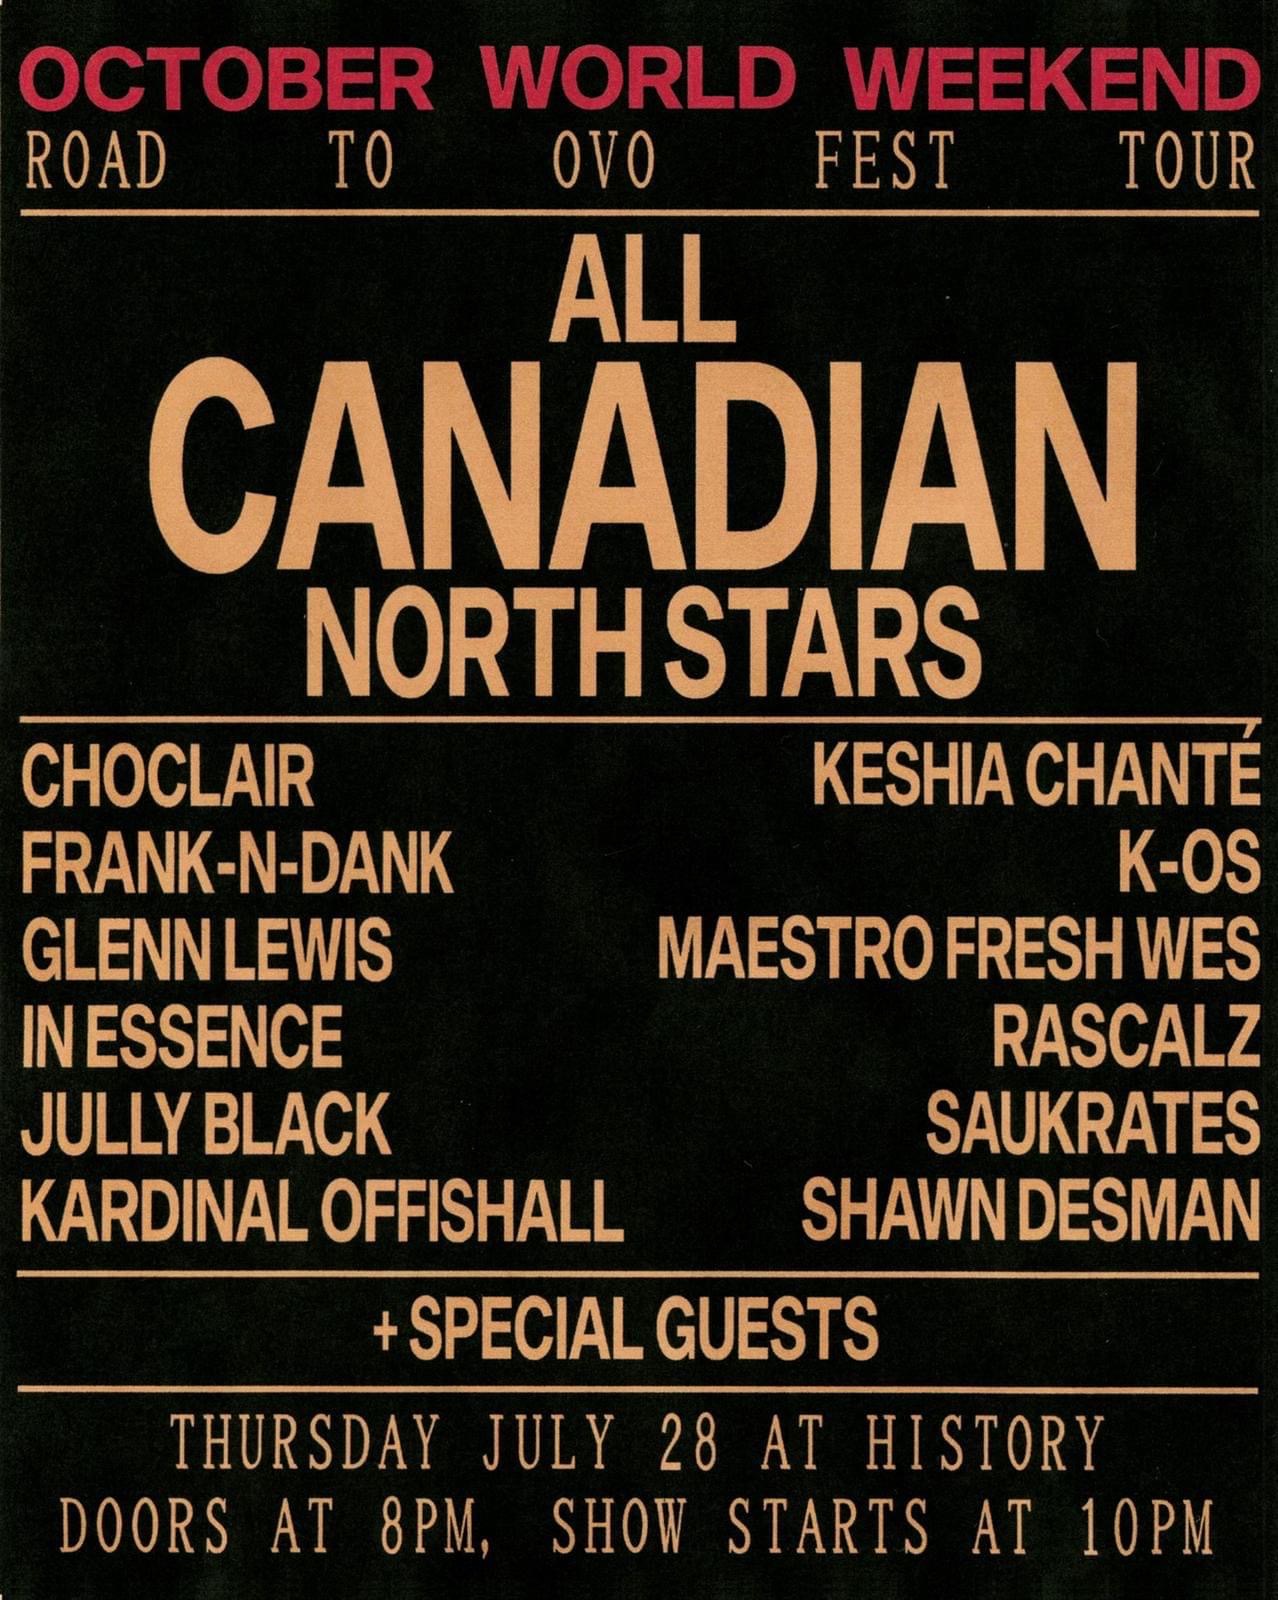 October World Weekend Road to OVO Fest Tour with All Canadian North